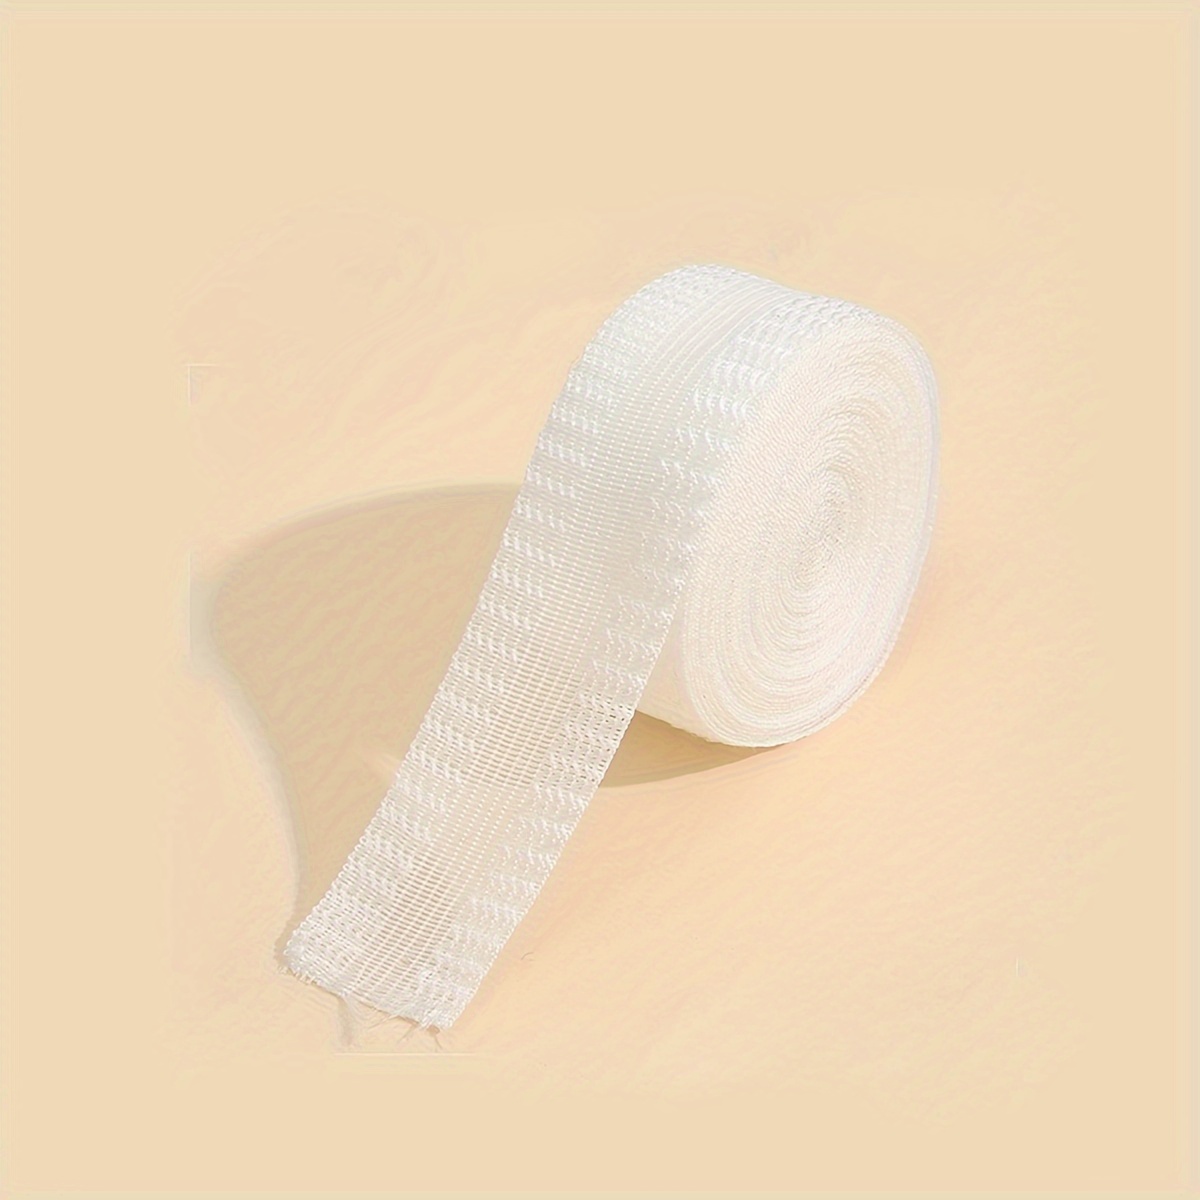 39.37/78.74/118.11/196.85inch No-Sew Solution: Self-Adhesive Jean Patch For  Quick And Easy Clothing Repair, Self-Adhesive Iron-On Fabric Tape Iron-On Hem  Tape Fabric Iron-On Hemming Tape Trouser Mouth Paste